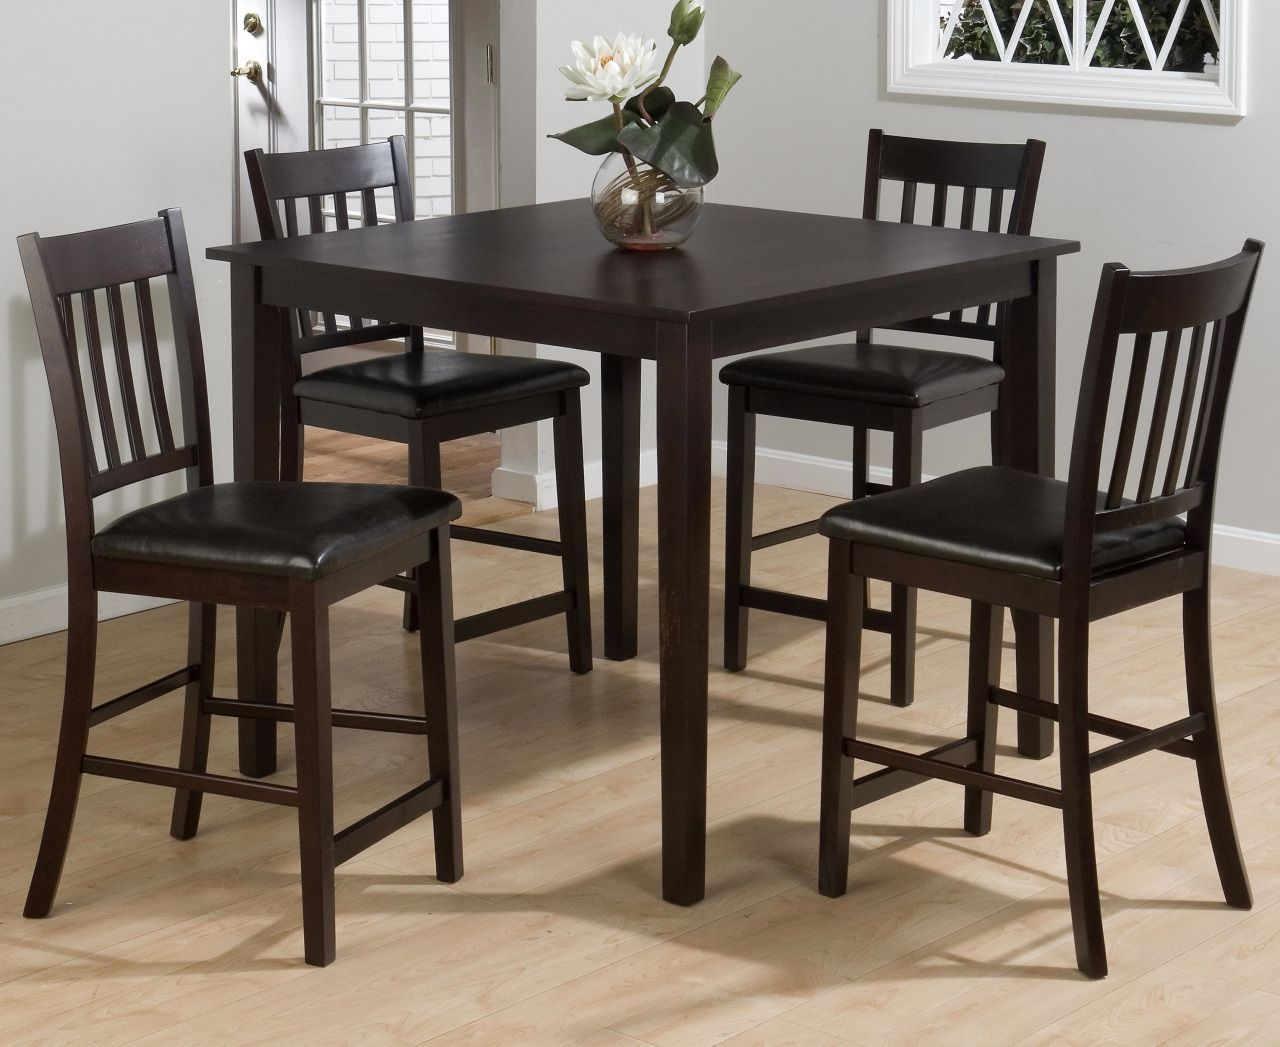 50 Big Lots Dining Room Tables Rustic Modern Furniture throughout size 1280 X 1047